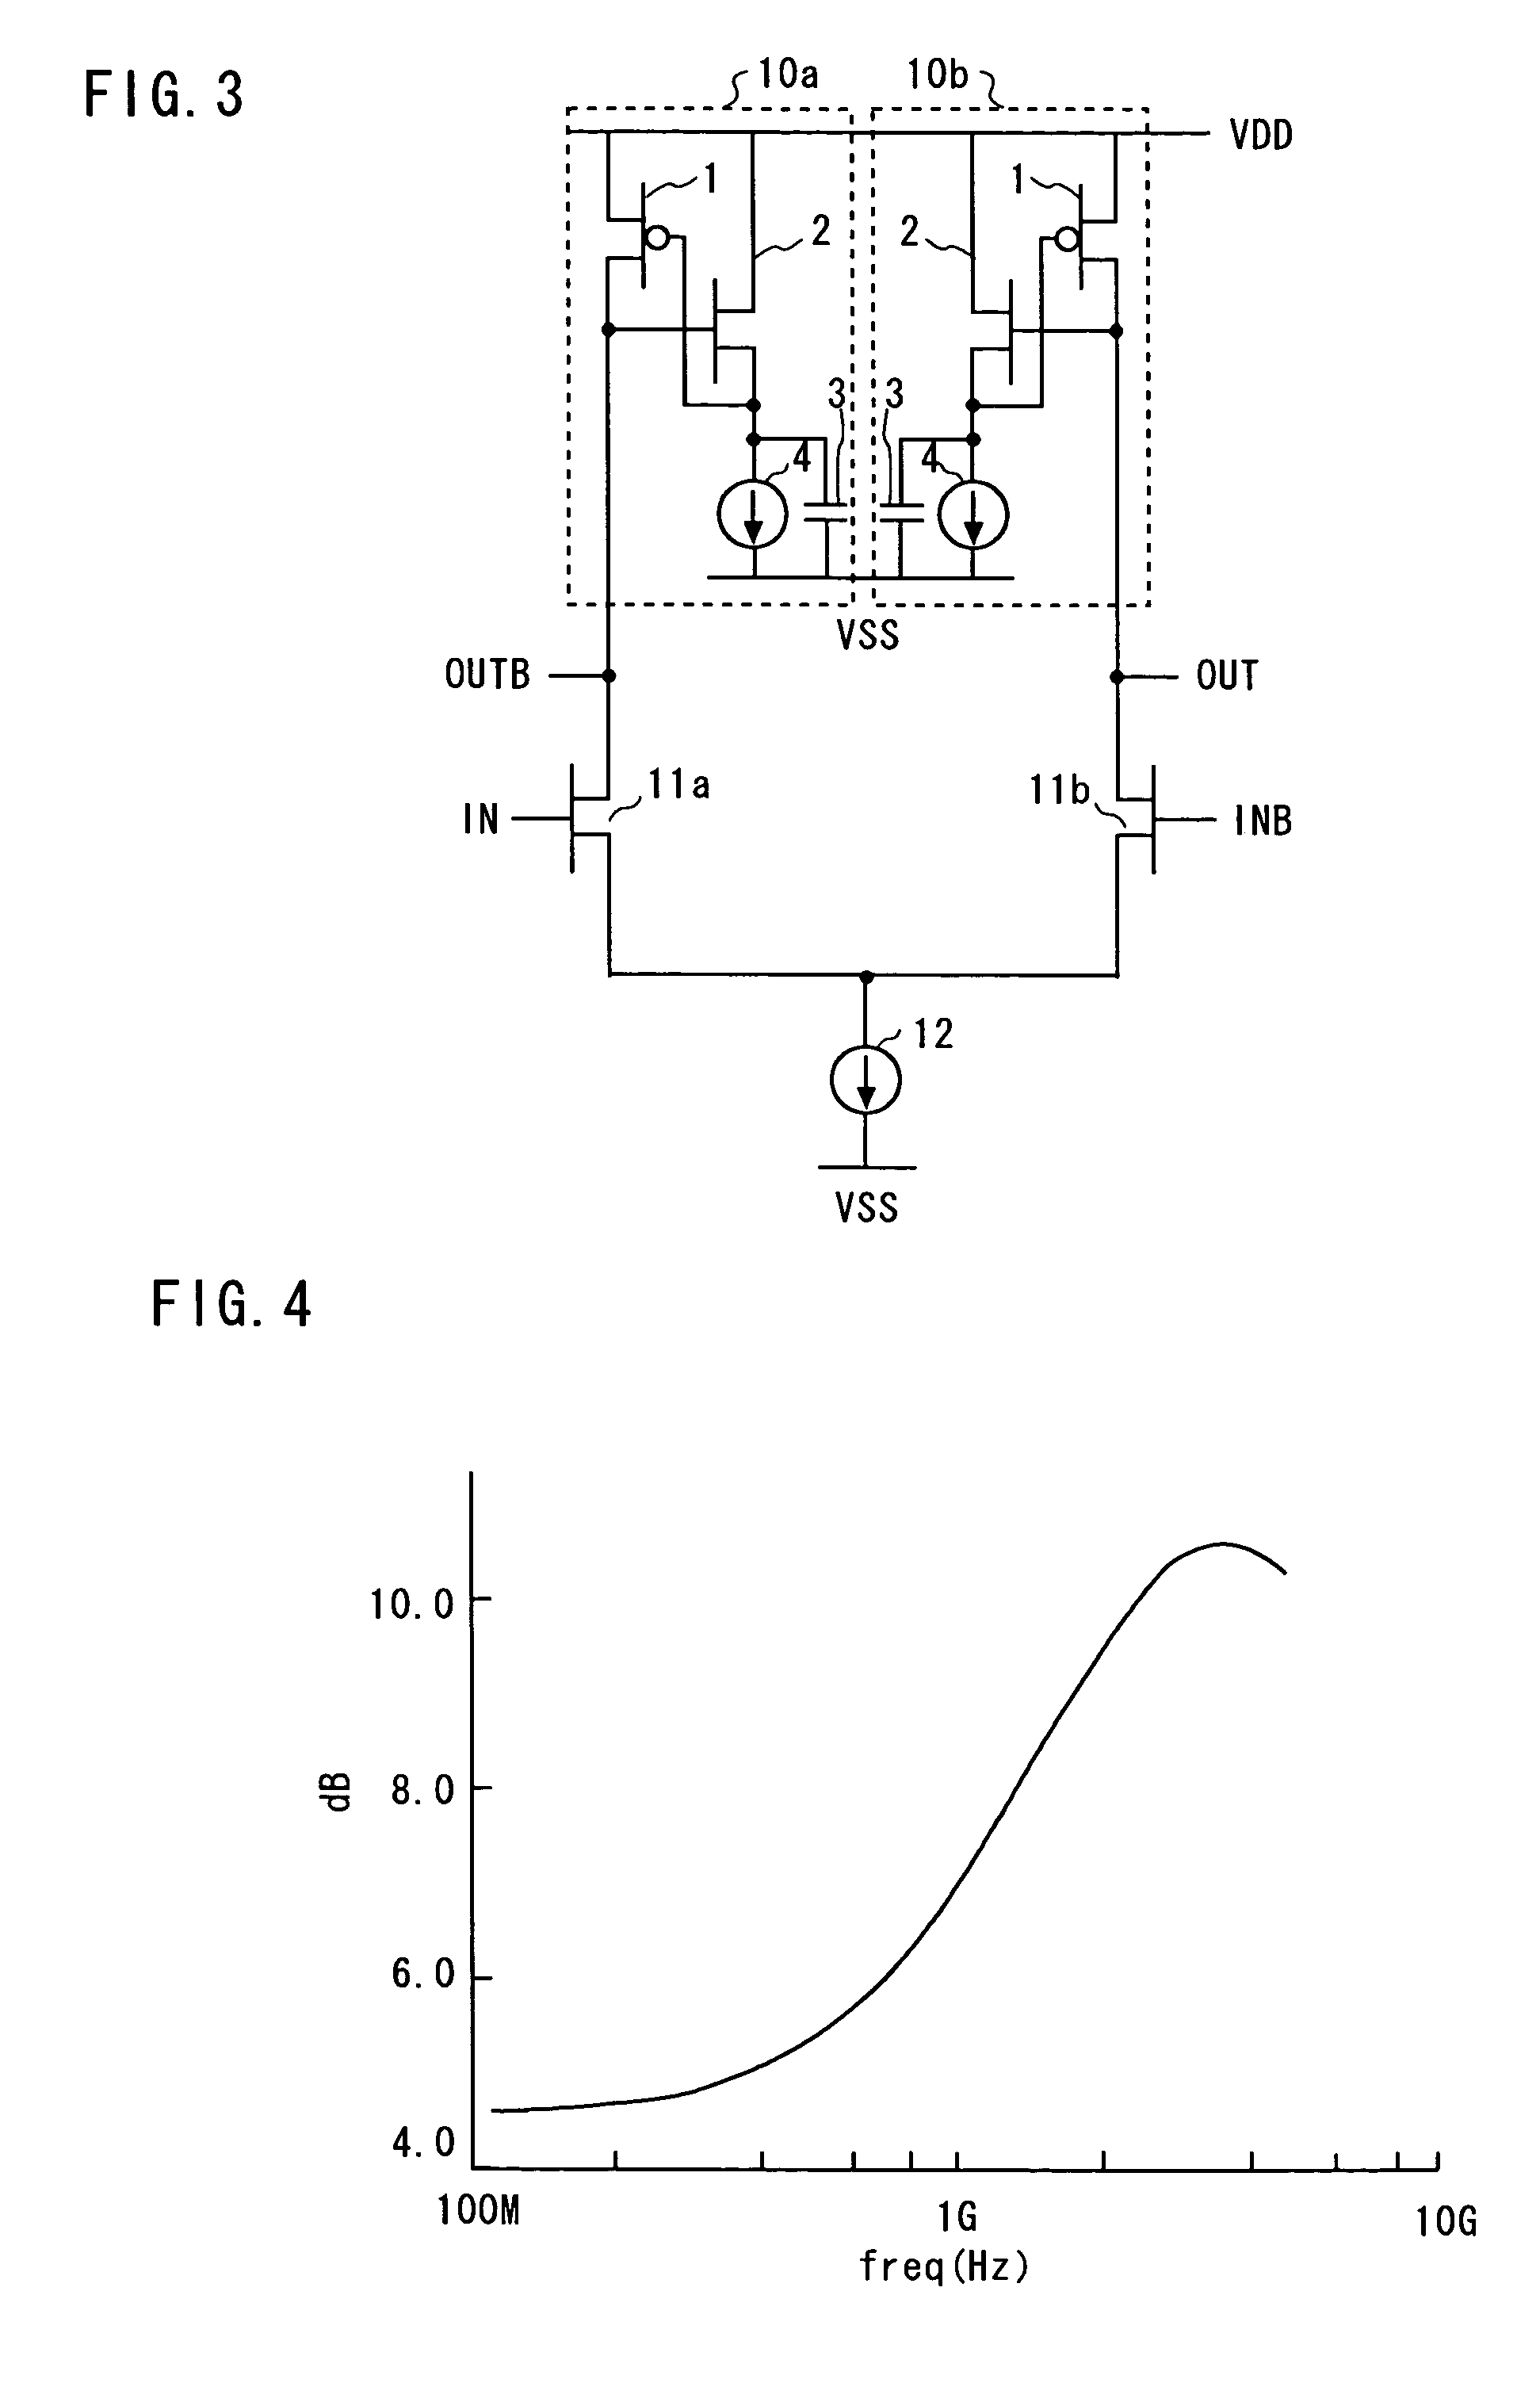 Active inductance circuit and differential amplifier circuit